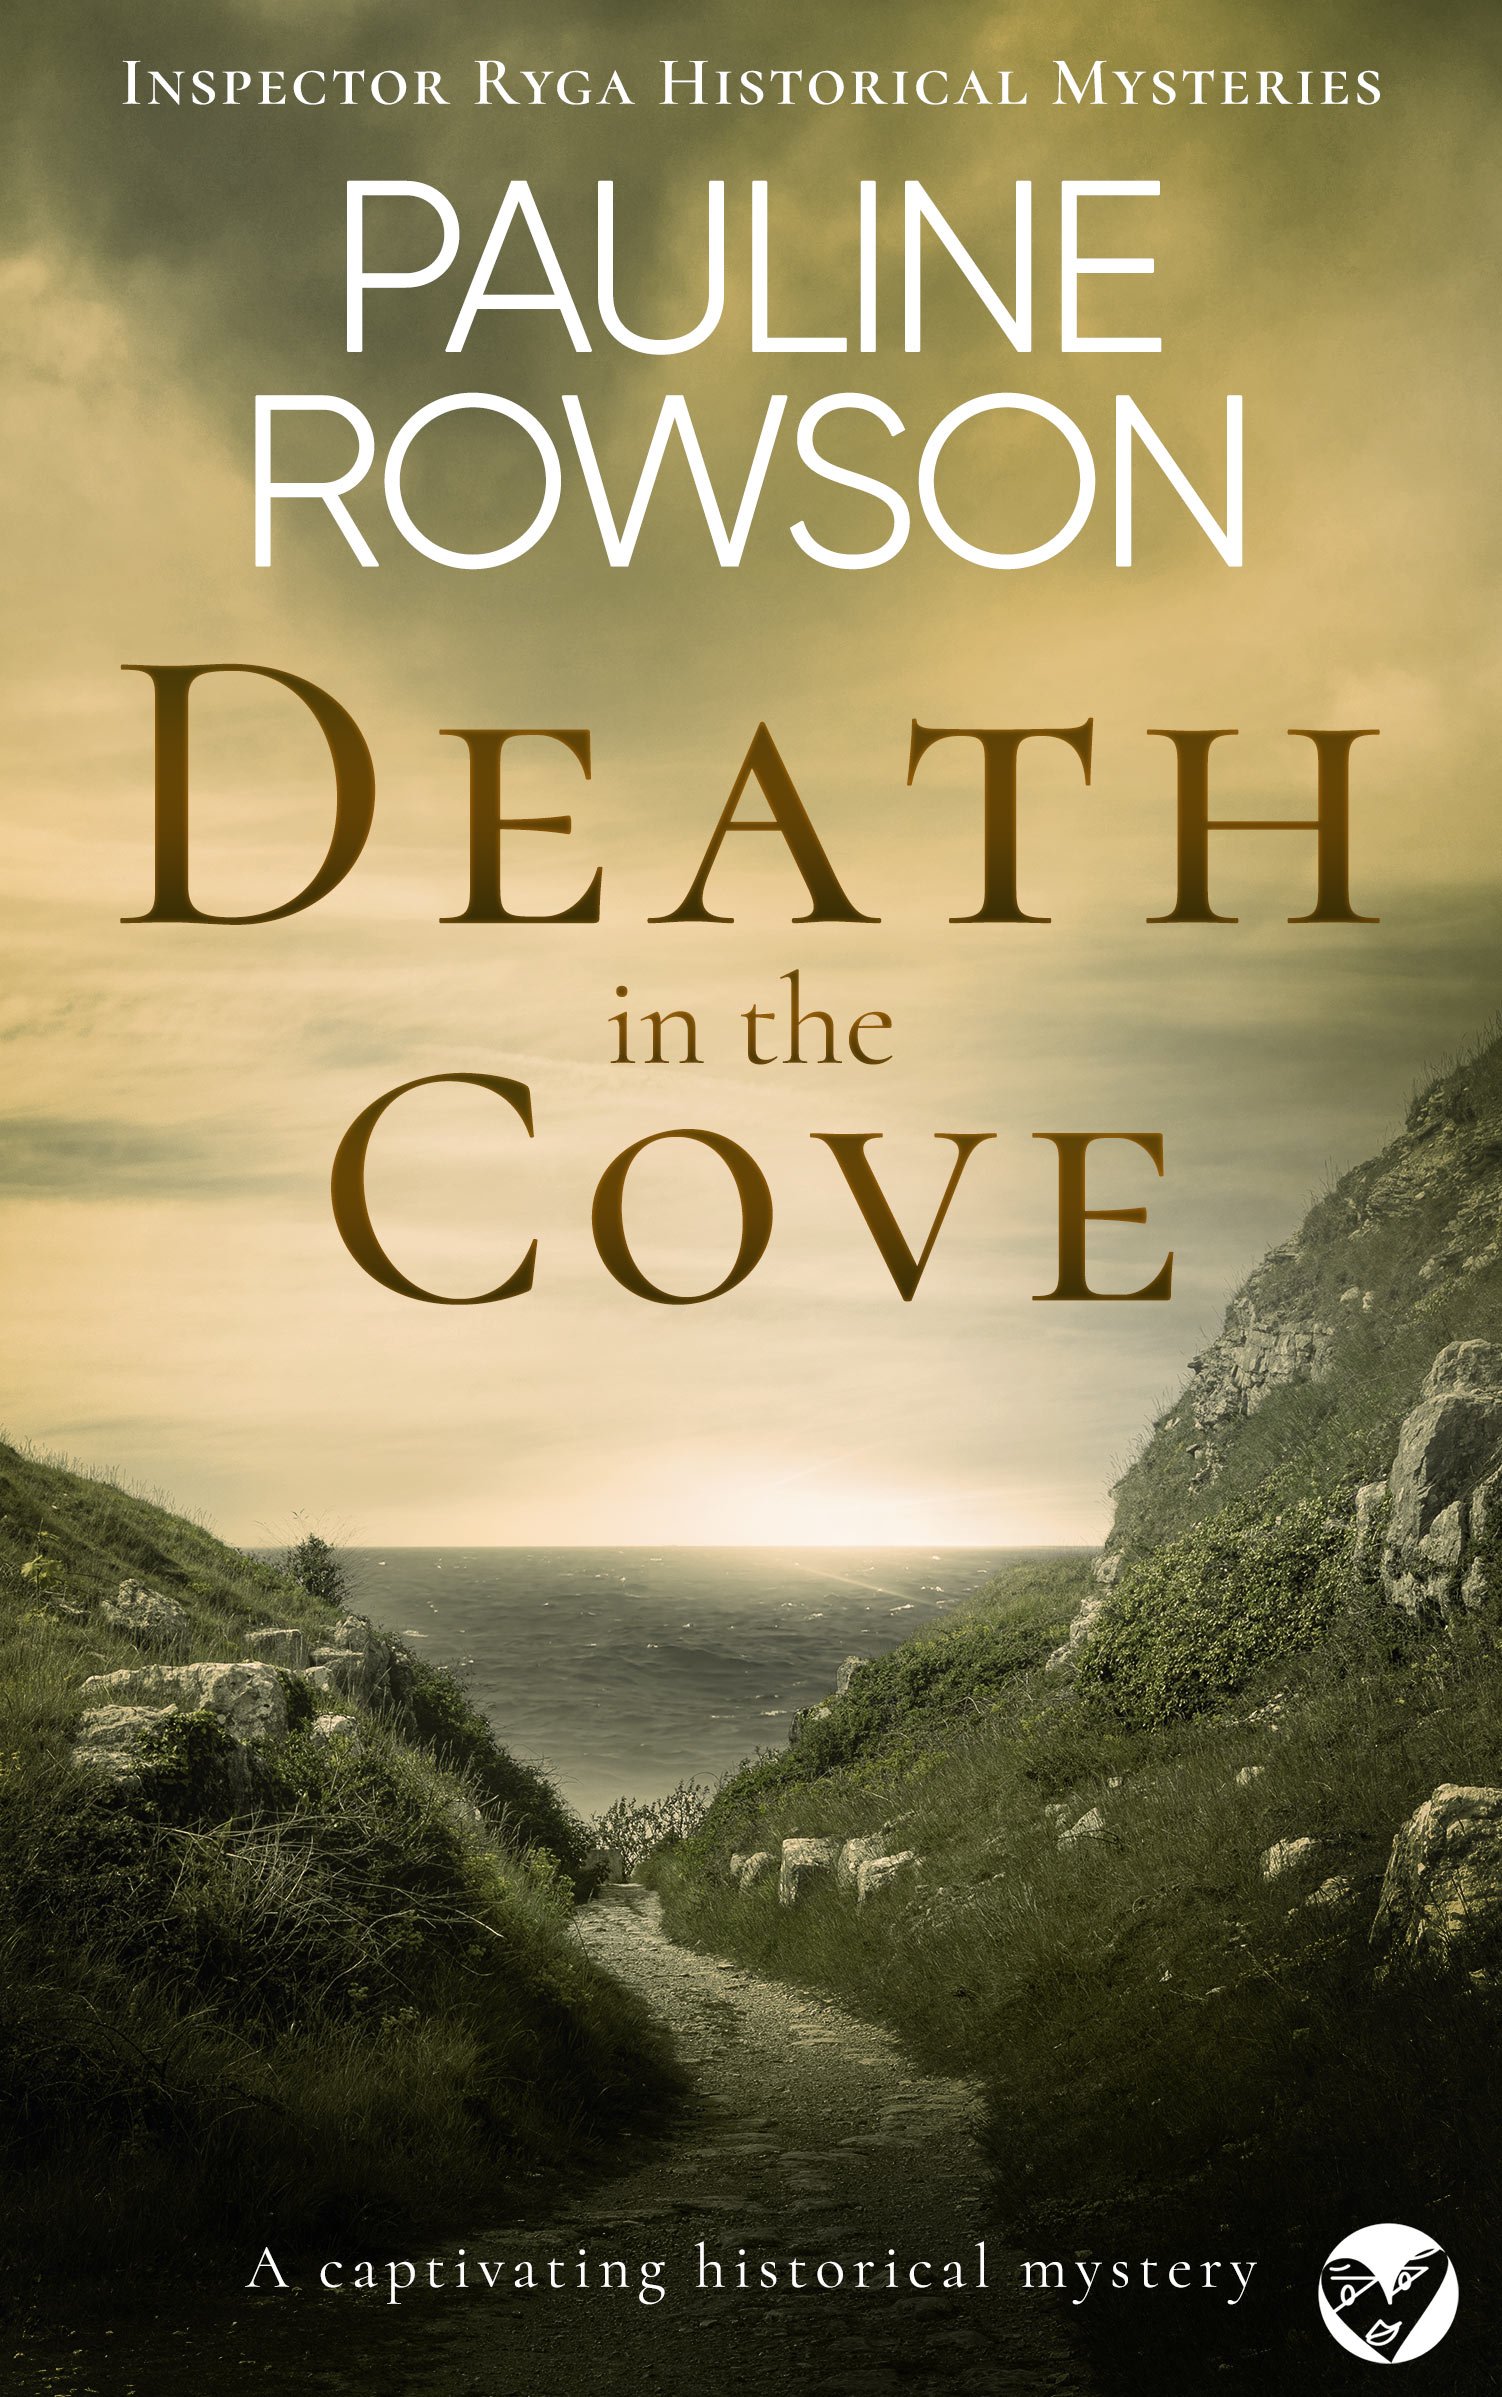 DEATH IN THE COVE Cover publish 601KB.jpg